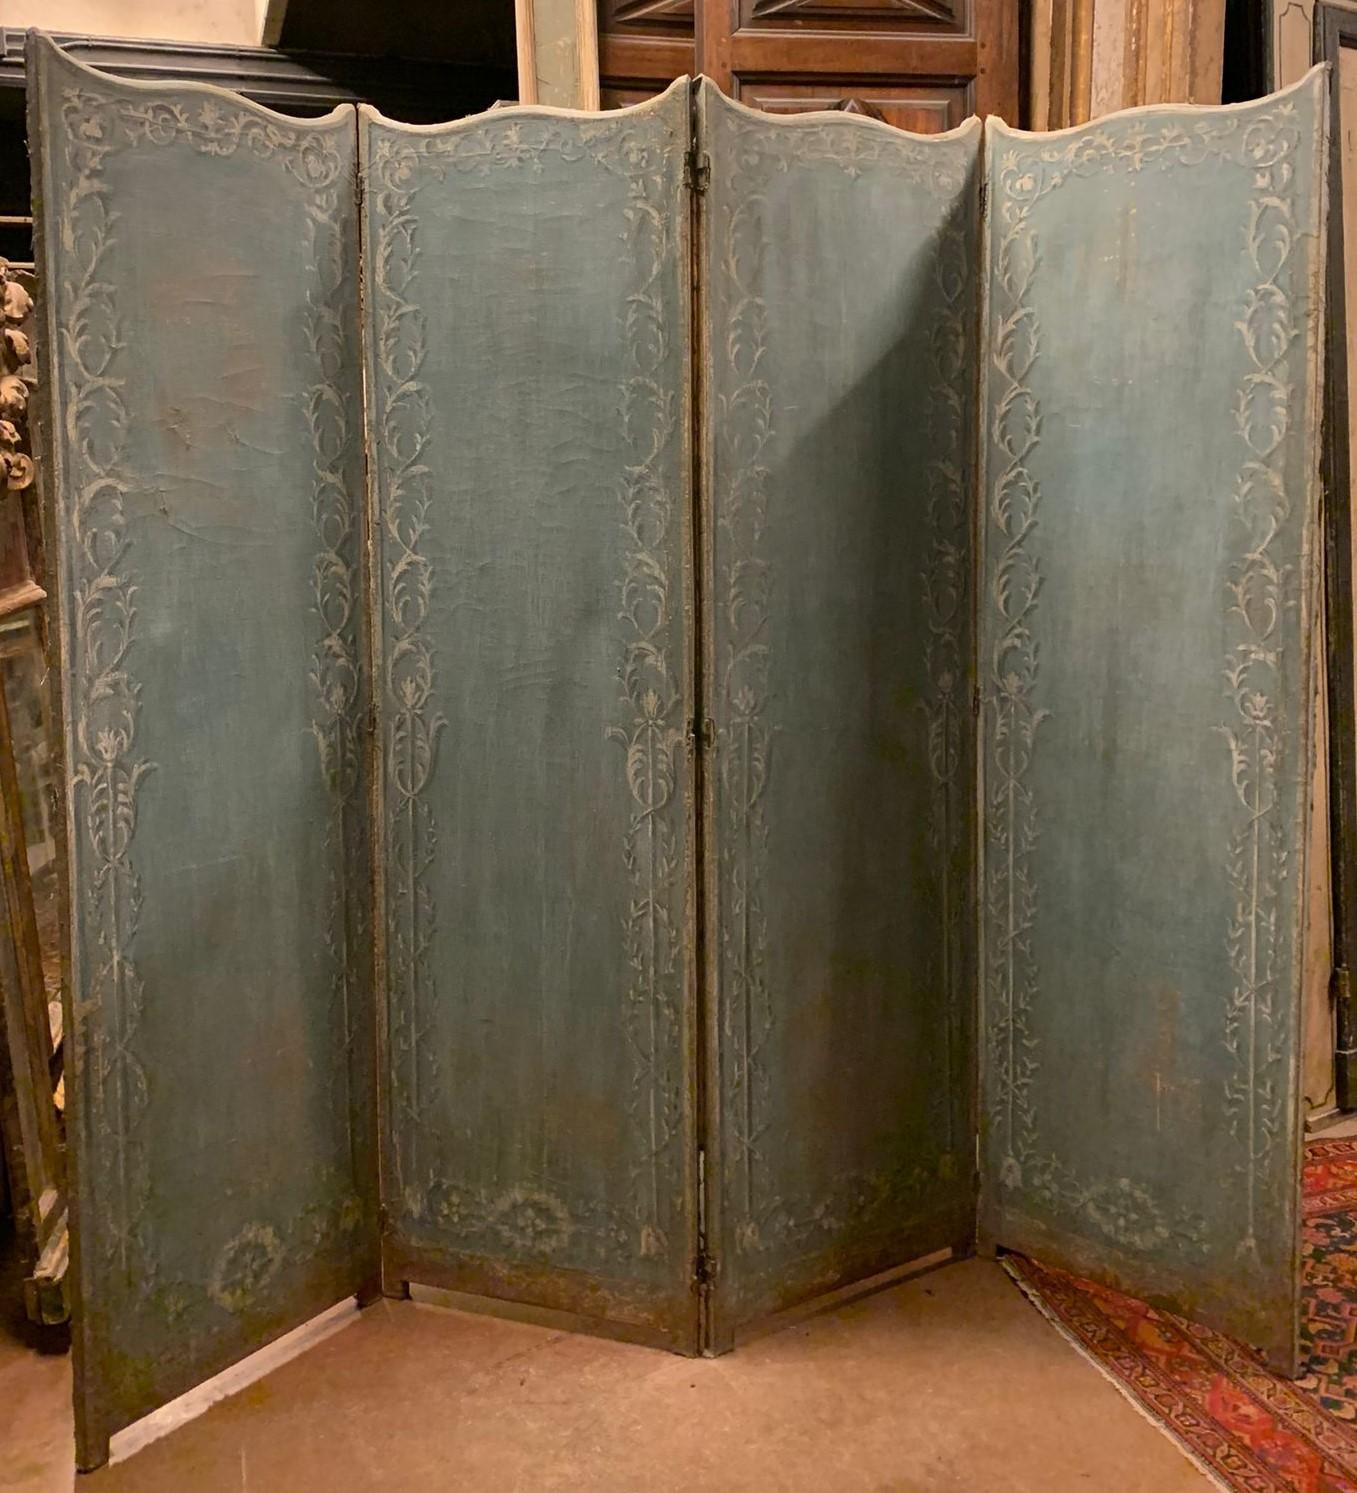 Antique canvas screen painted with rich baroque frame motifs, light blue and white frills, composed of 4 folding doors with book opening, handmade in Italy in the 18th century, measuring w 200 cm (50 cm x 4 doors) x H 178